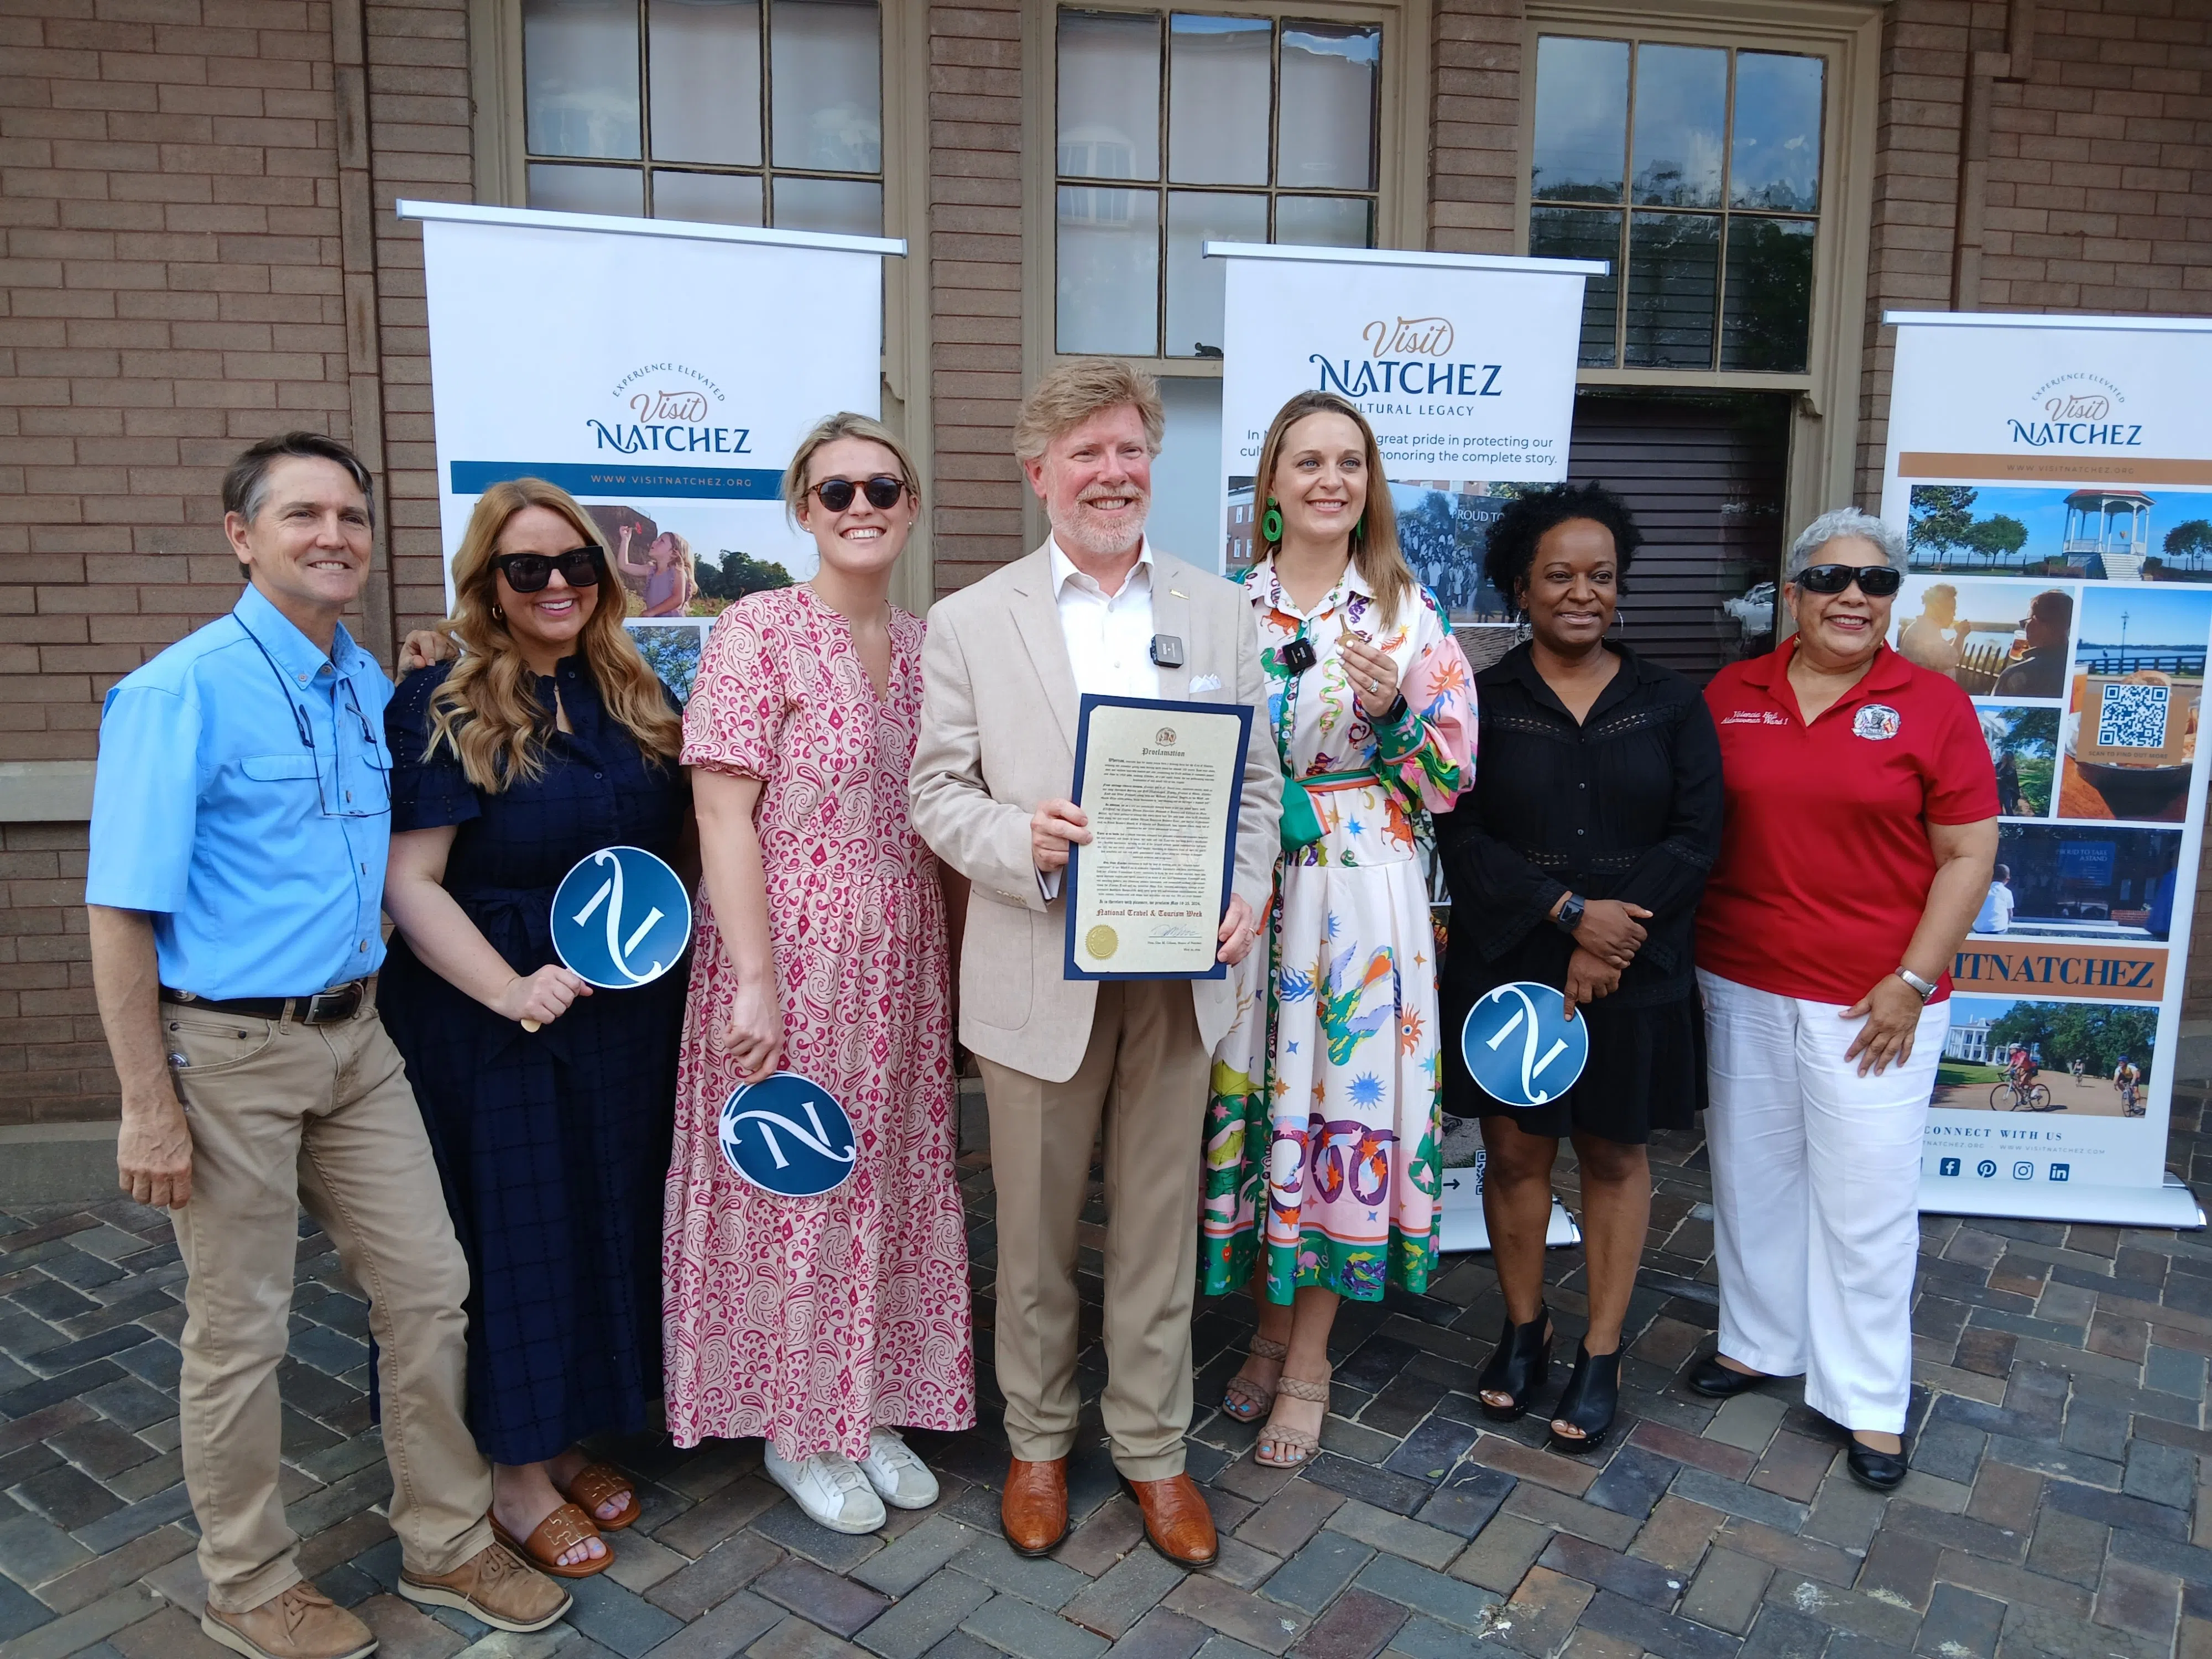 Visit Natchez Receives Key to Depot as the new Visitor Center on the Bluff